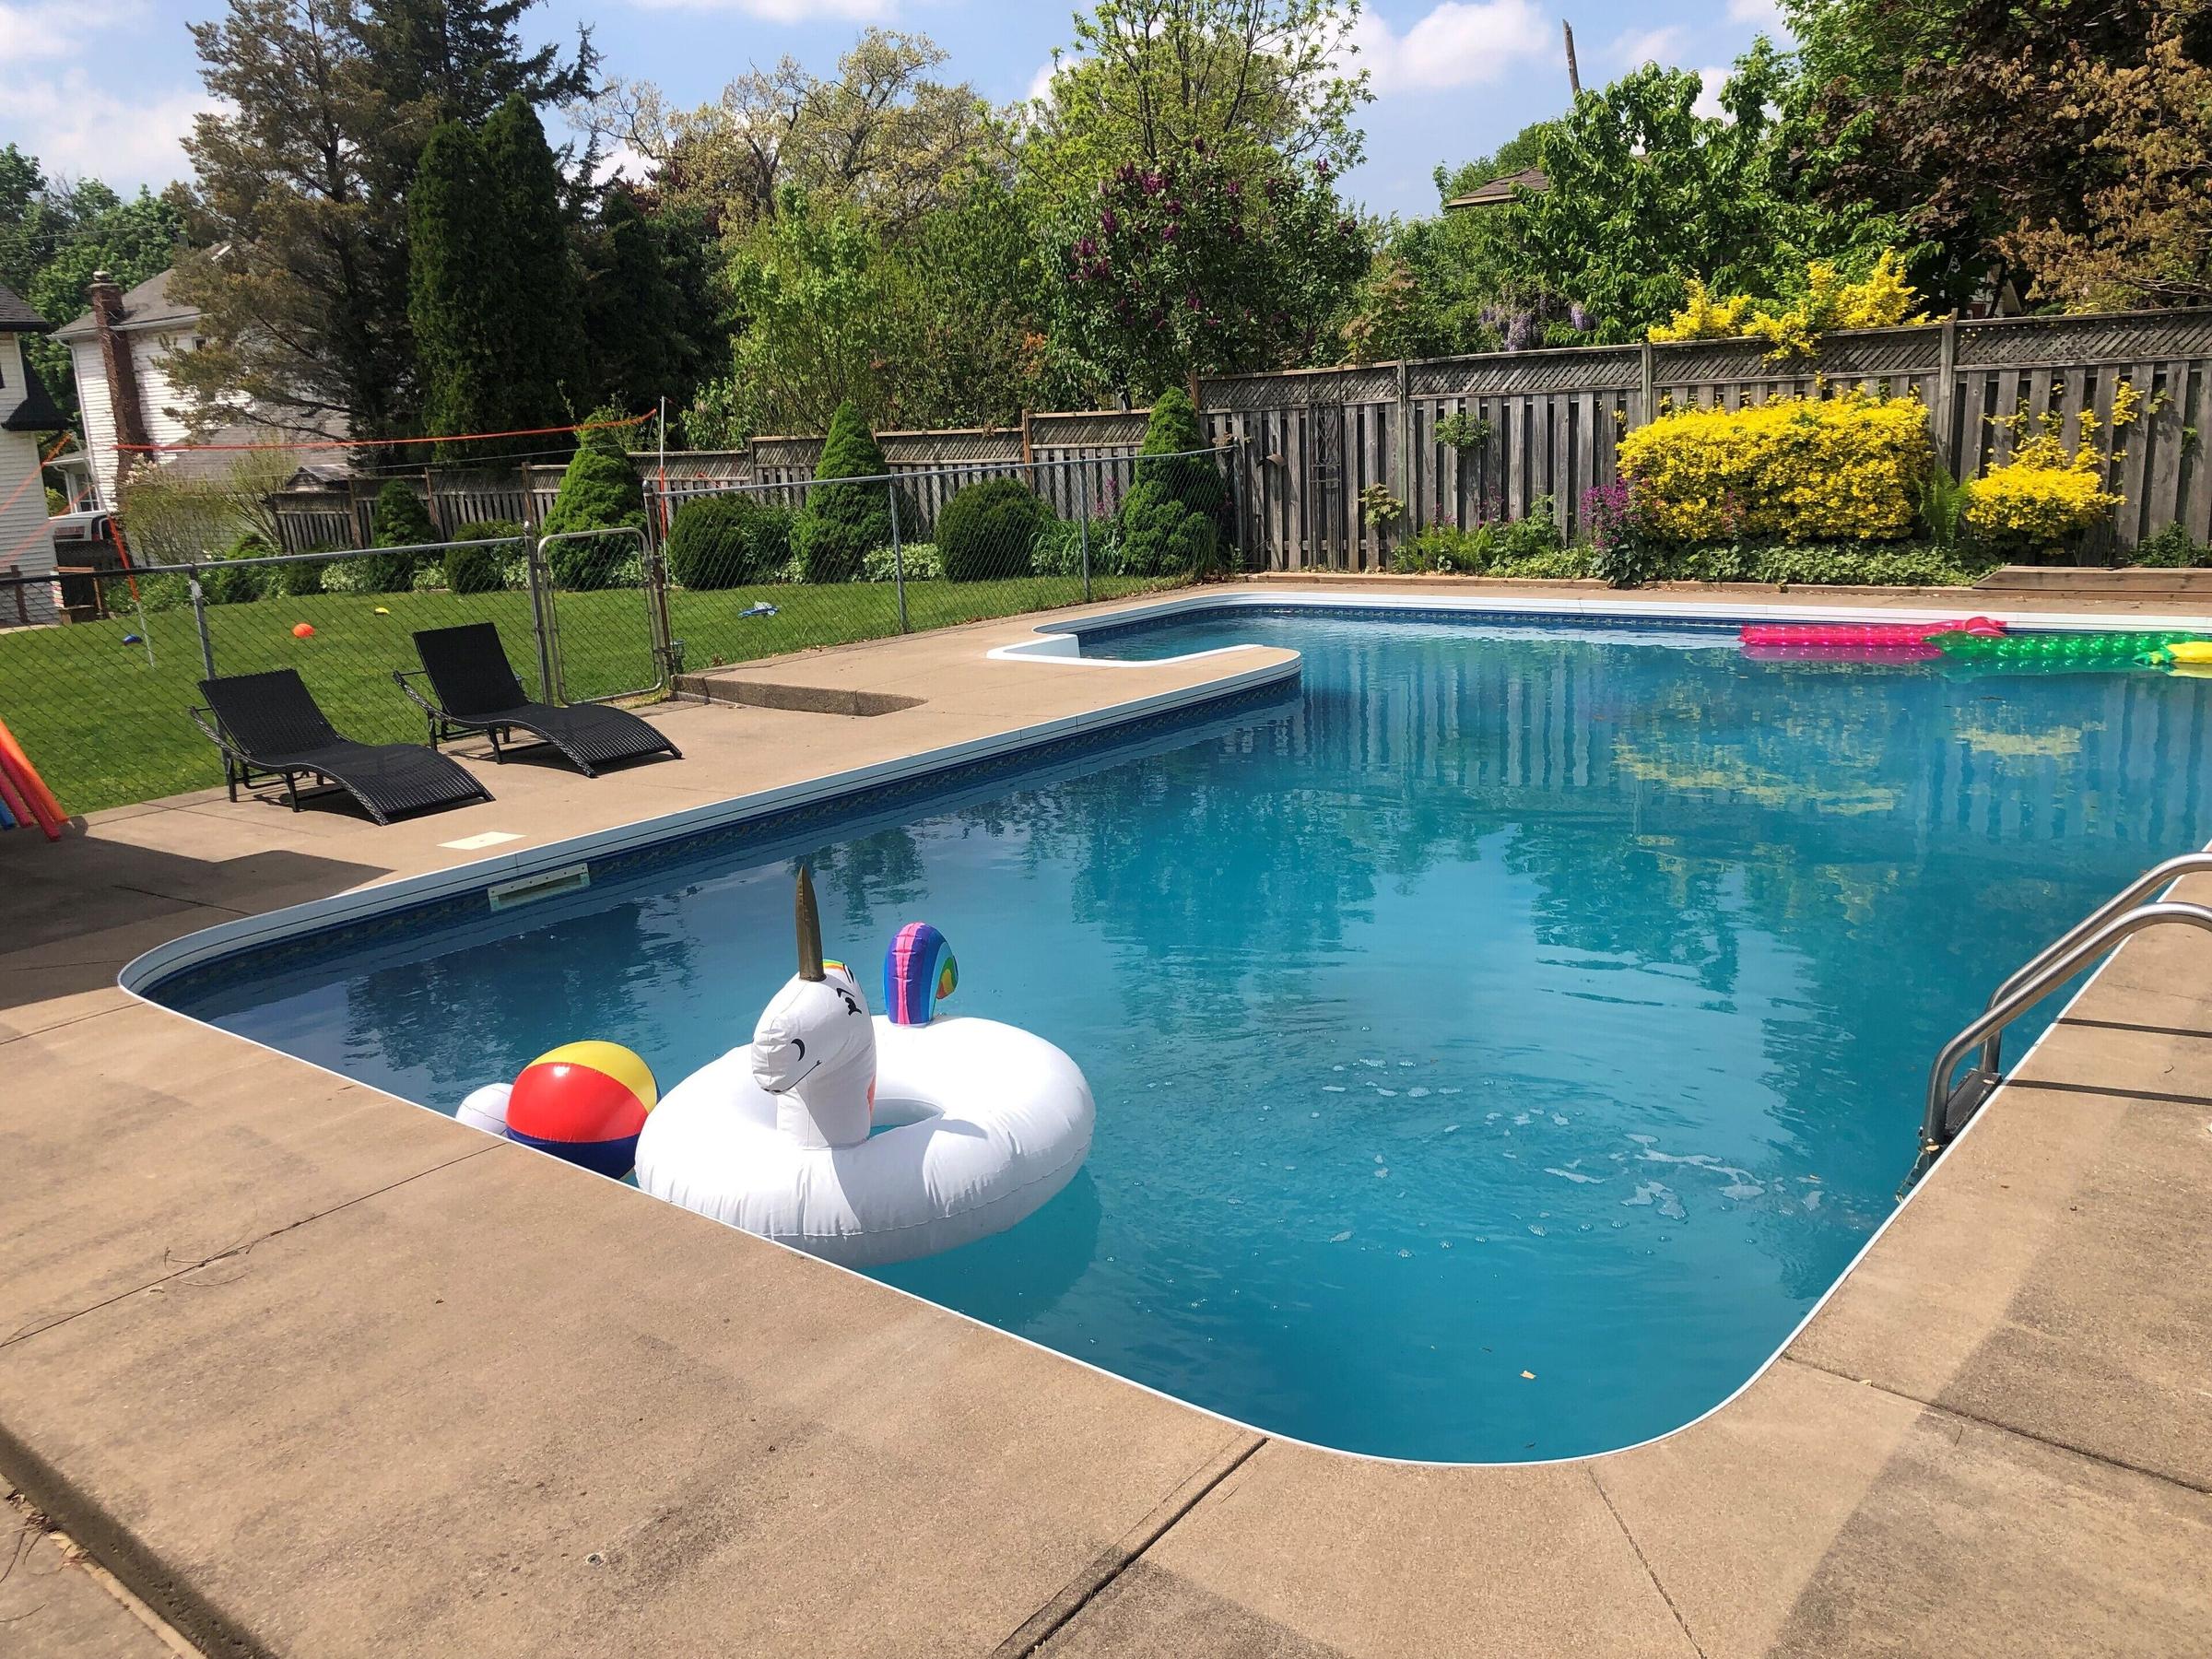 Pet Friendly Summer Home with a Pool Near Falls View Casino